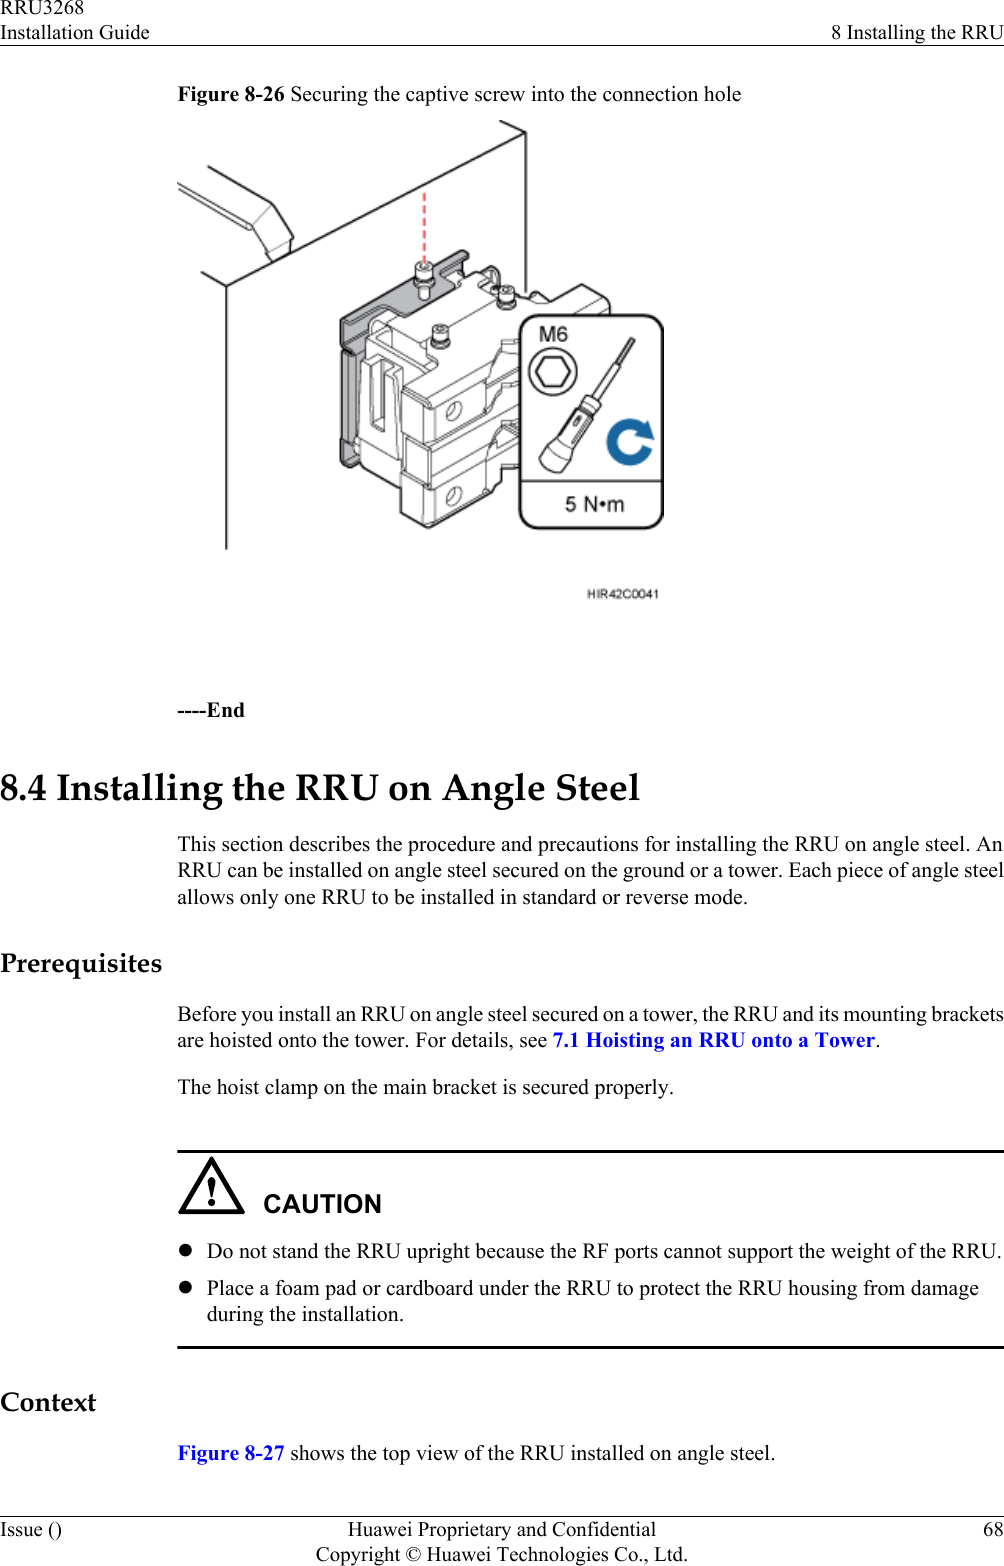 Figure 8-26 Securing the captive screw into the connection hole ----End8.4 Installing the RRU on Angle SteelThis section describes the procedure and precautions for installing the RRU on angle steel. AnRRU can be installed on angle steel secured on the ground or a tower. Each piece of angle steelallows only one RRU to be installed in standard or reverse mode.PrerequisitesBefore you install an RRU on angle steel secured on a tower, the RRU and its mounting bracketsare hoisted onto the tower. For details, see 7.1 Hoisting an RRU onto a Tower.The hoist clamp on the main bracket is secured properly.CAUTIONlDo not stand the RRU upright because the RF ports cannot support the weight of the RRU.lPlace a foam pad or cardboard under the RRU to protect the RRU housing from damageduring the installation.ContextFigure 8-27 shows the top view of the RRU installed on angle steel.RRU3268Installation Guide 8 Installing the RRUIssue () Huawei Proprietary and ConfidentialCopyright © Huawei Technologies Co., Ltd.68